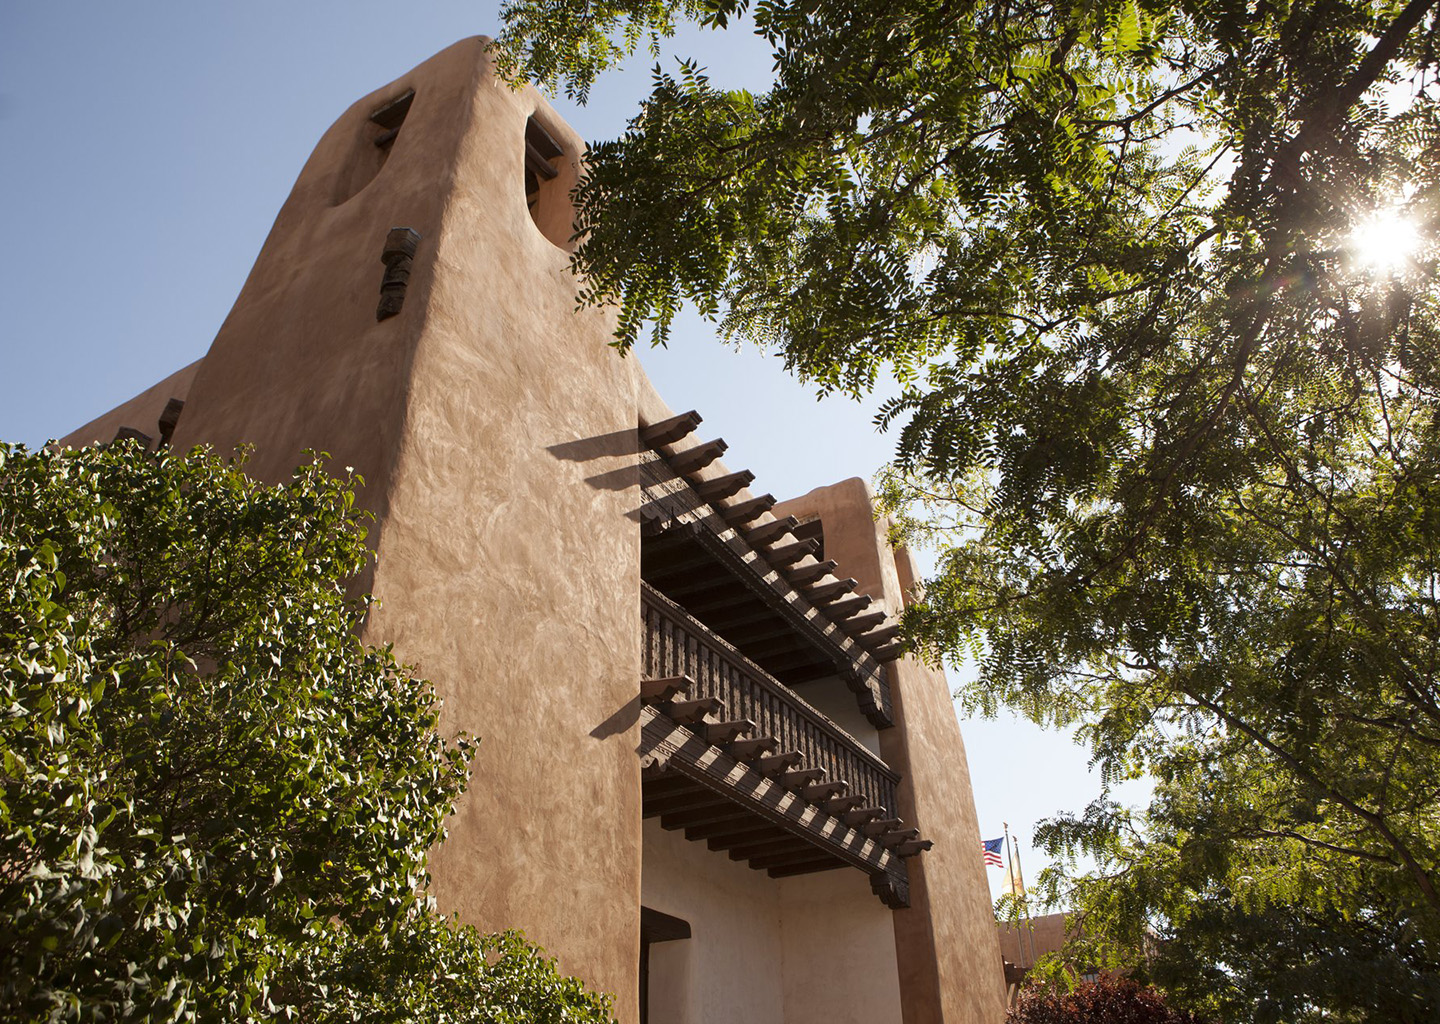 The exterior of the New Mexico Museum of Art